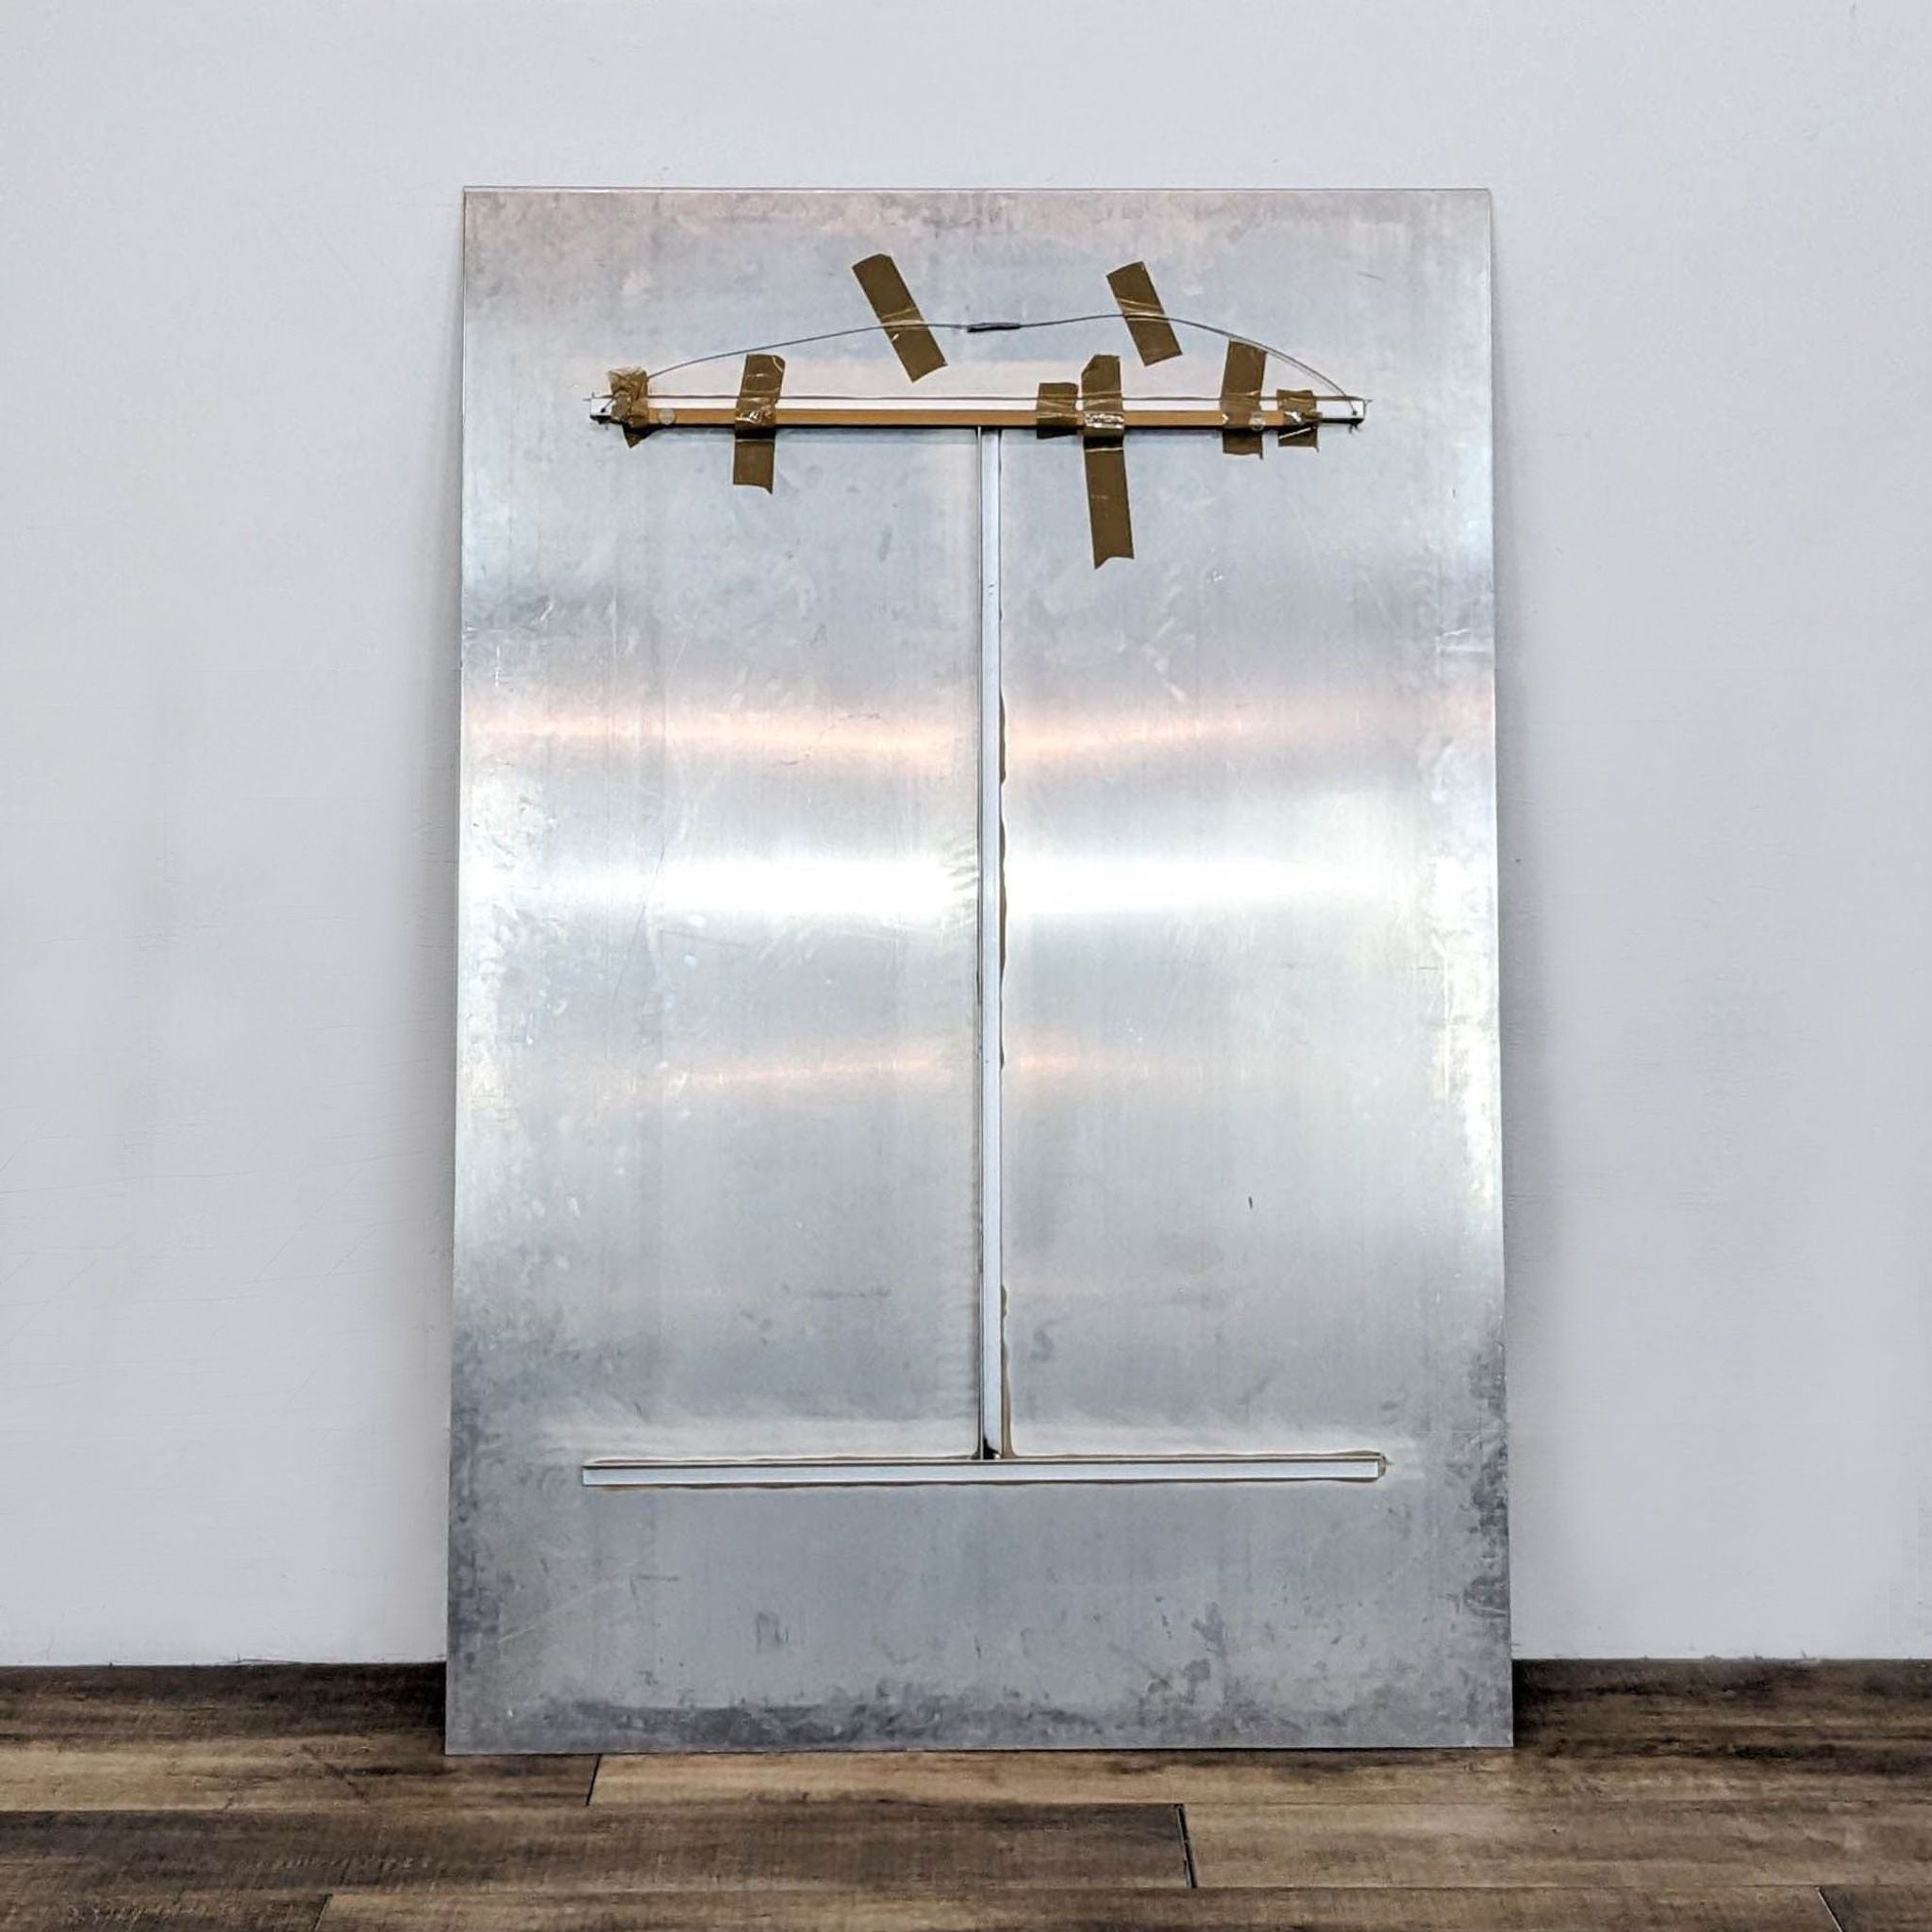 Rear view of "Dancer" aluminum print displaying mounted hanging hardware on back, by Reperch.